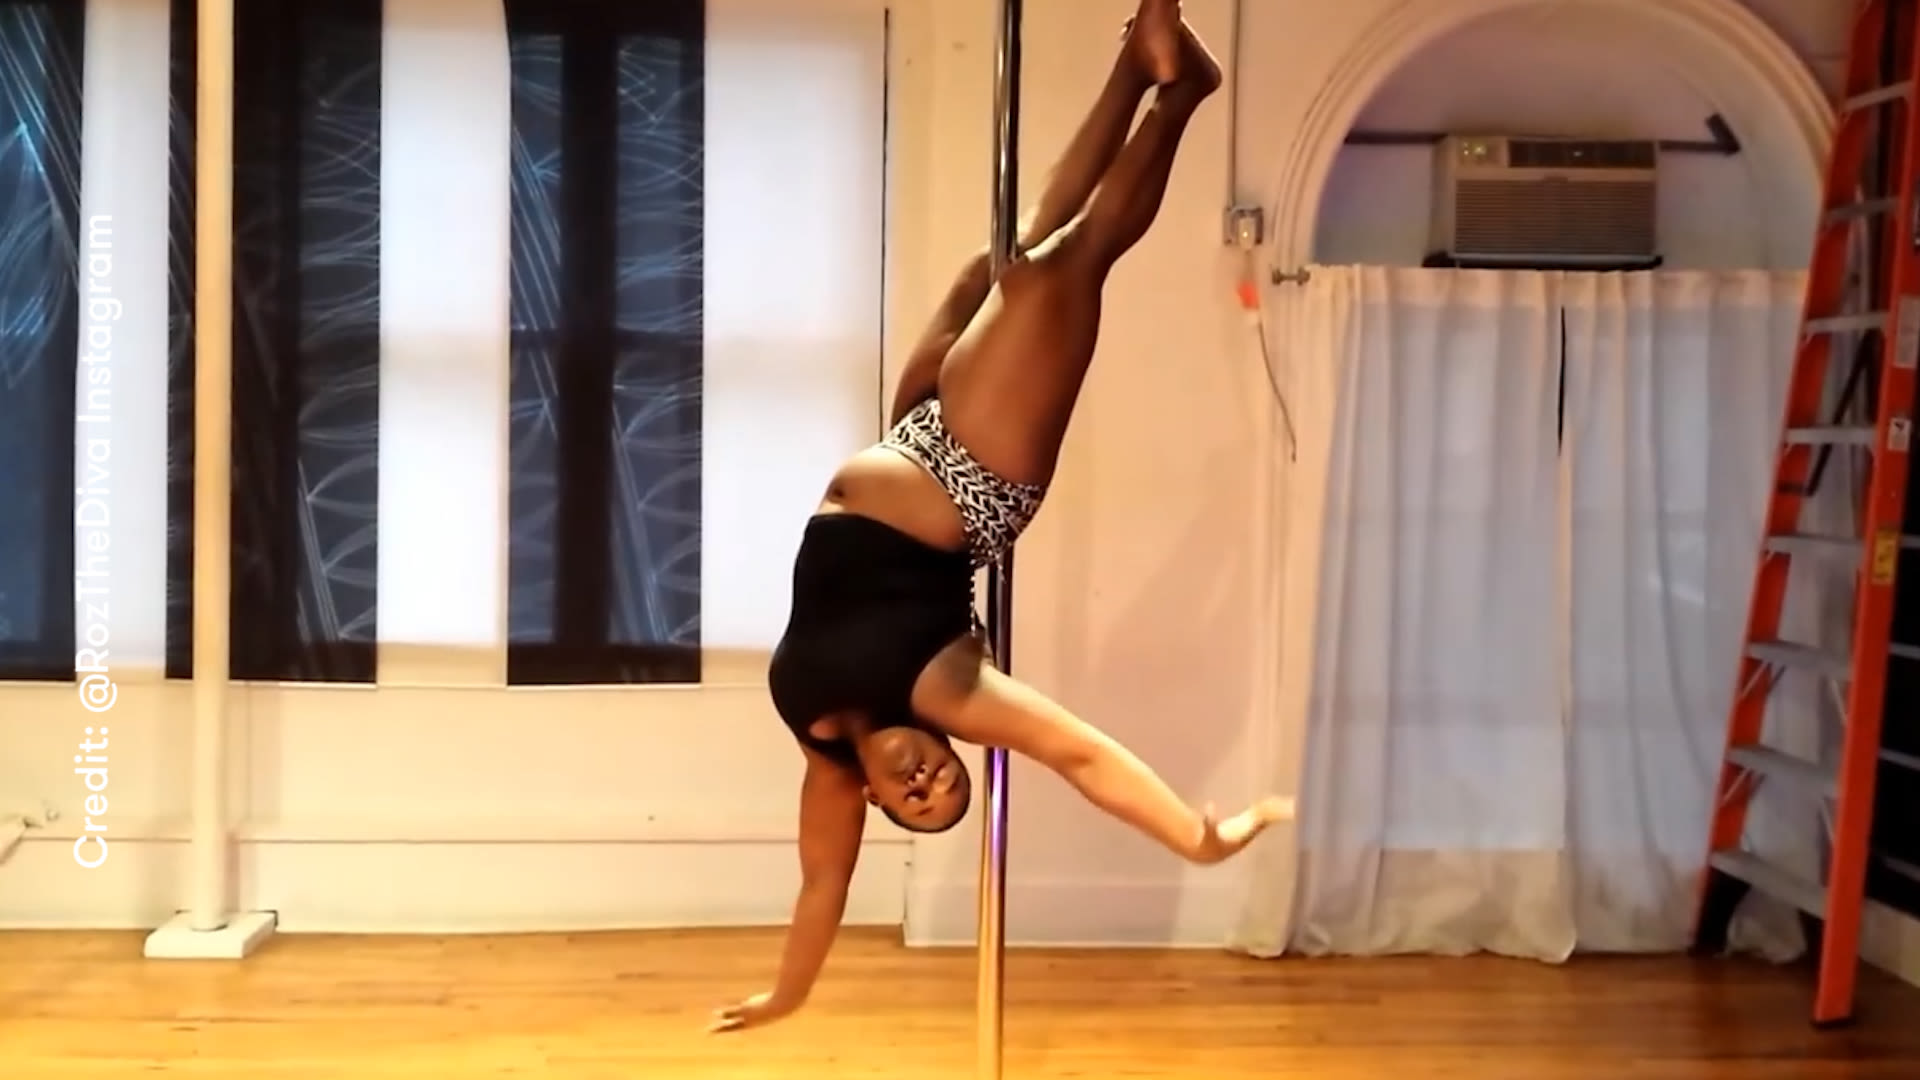 Watch Meet the Plus-Size Pole Dance Fitness Instructor Who's Redefining  What It Means to Be in Shape